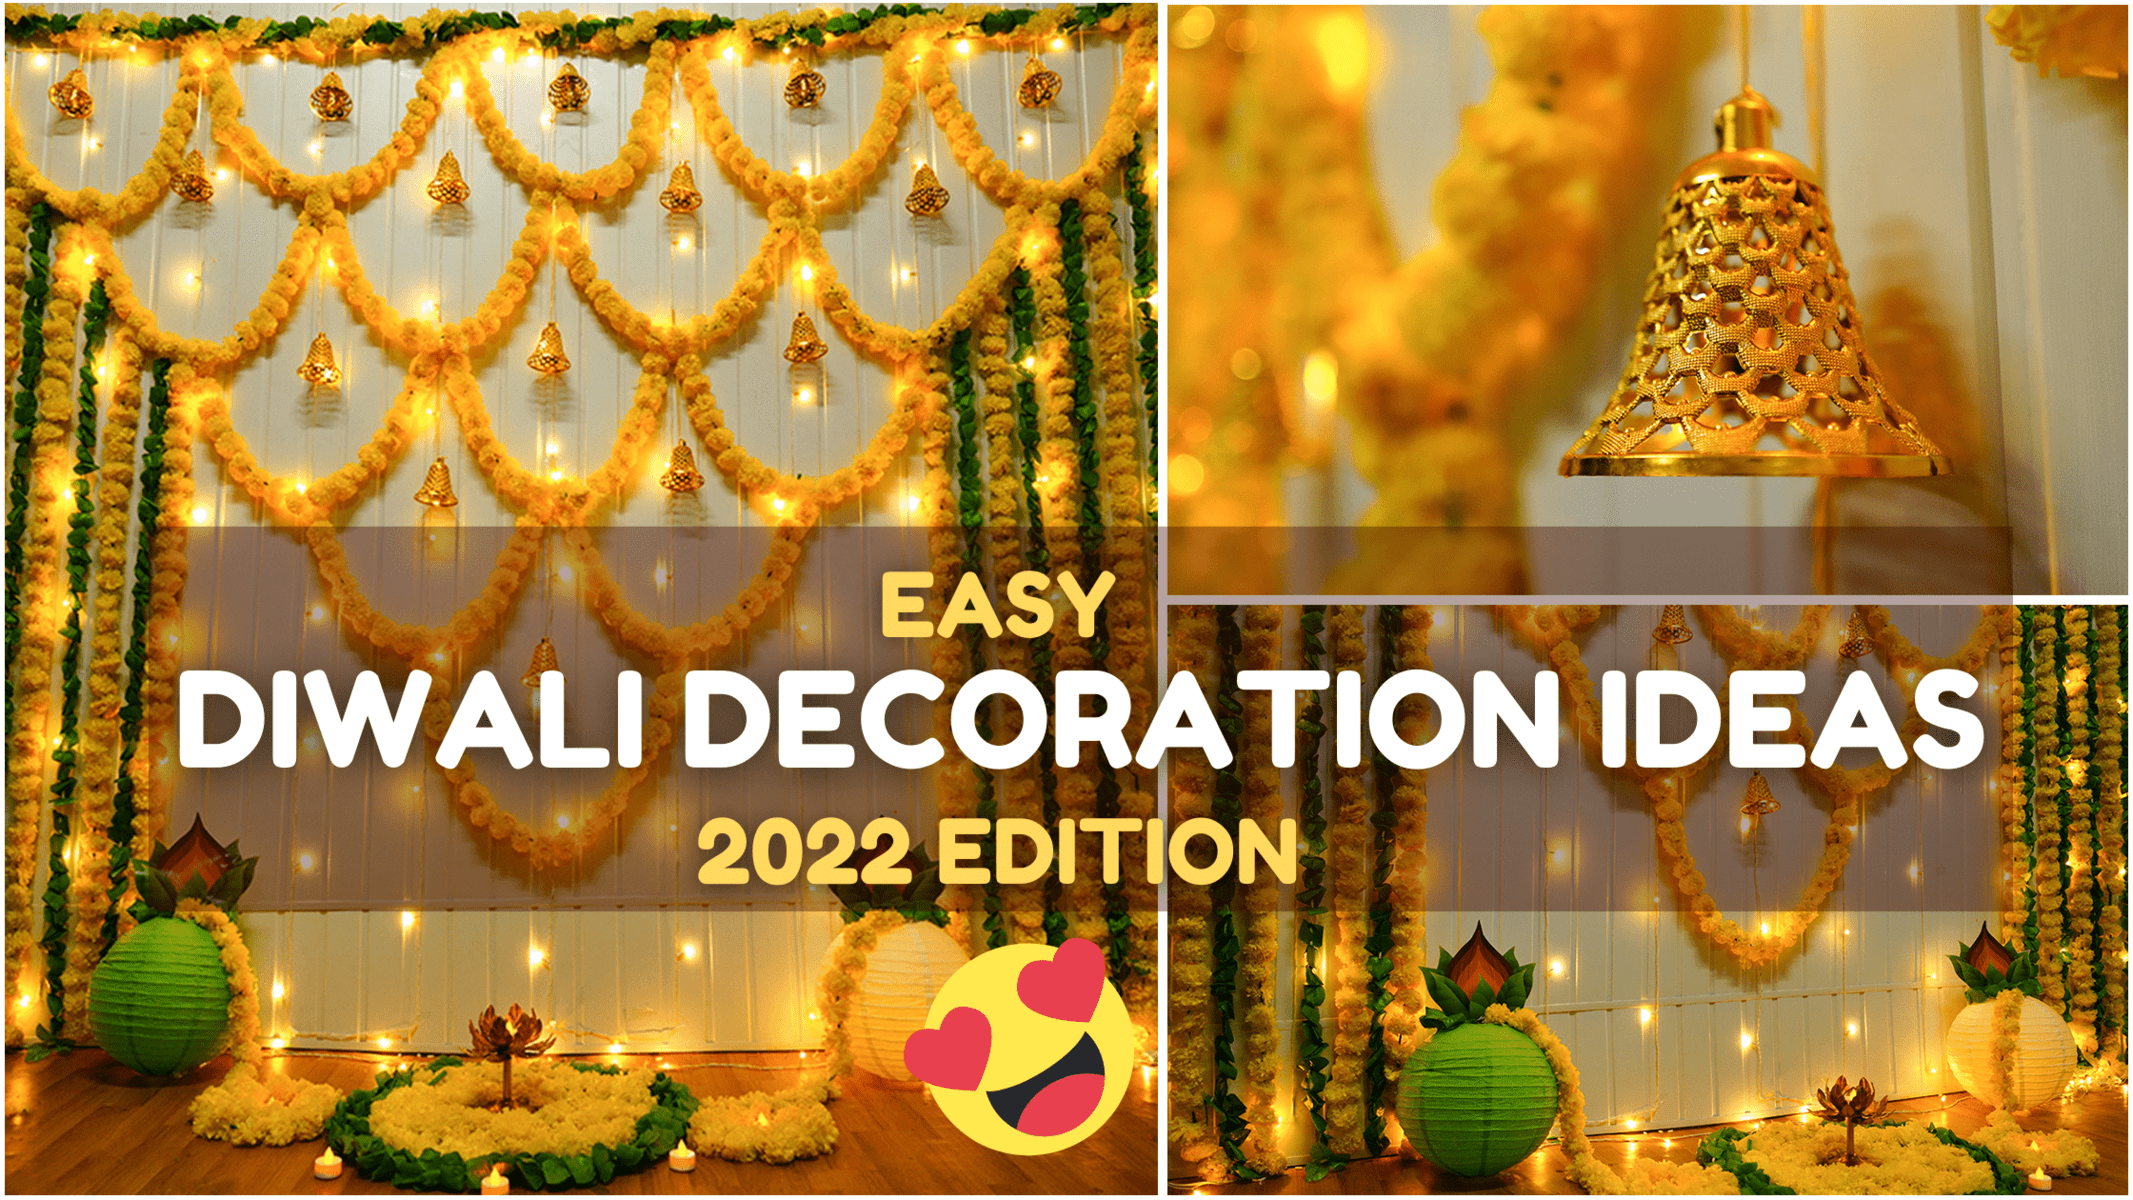 How to Decorate your home for Diwali 2022- Easy Decoration Ideas by CherishX